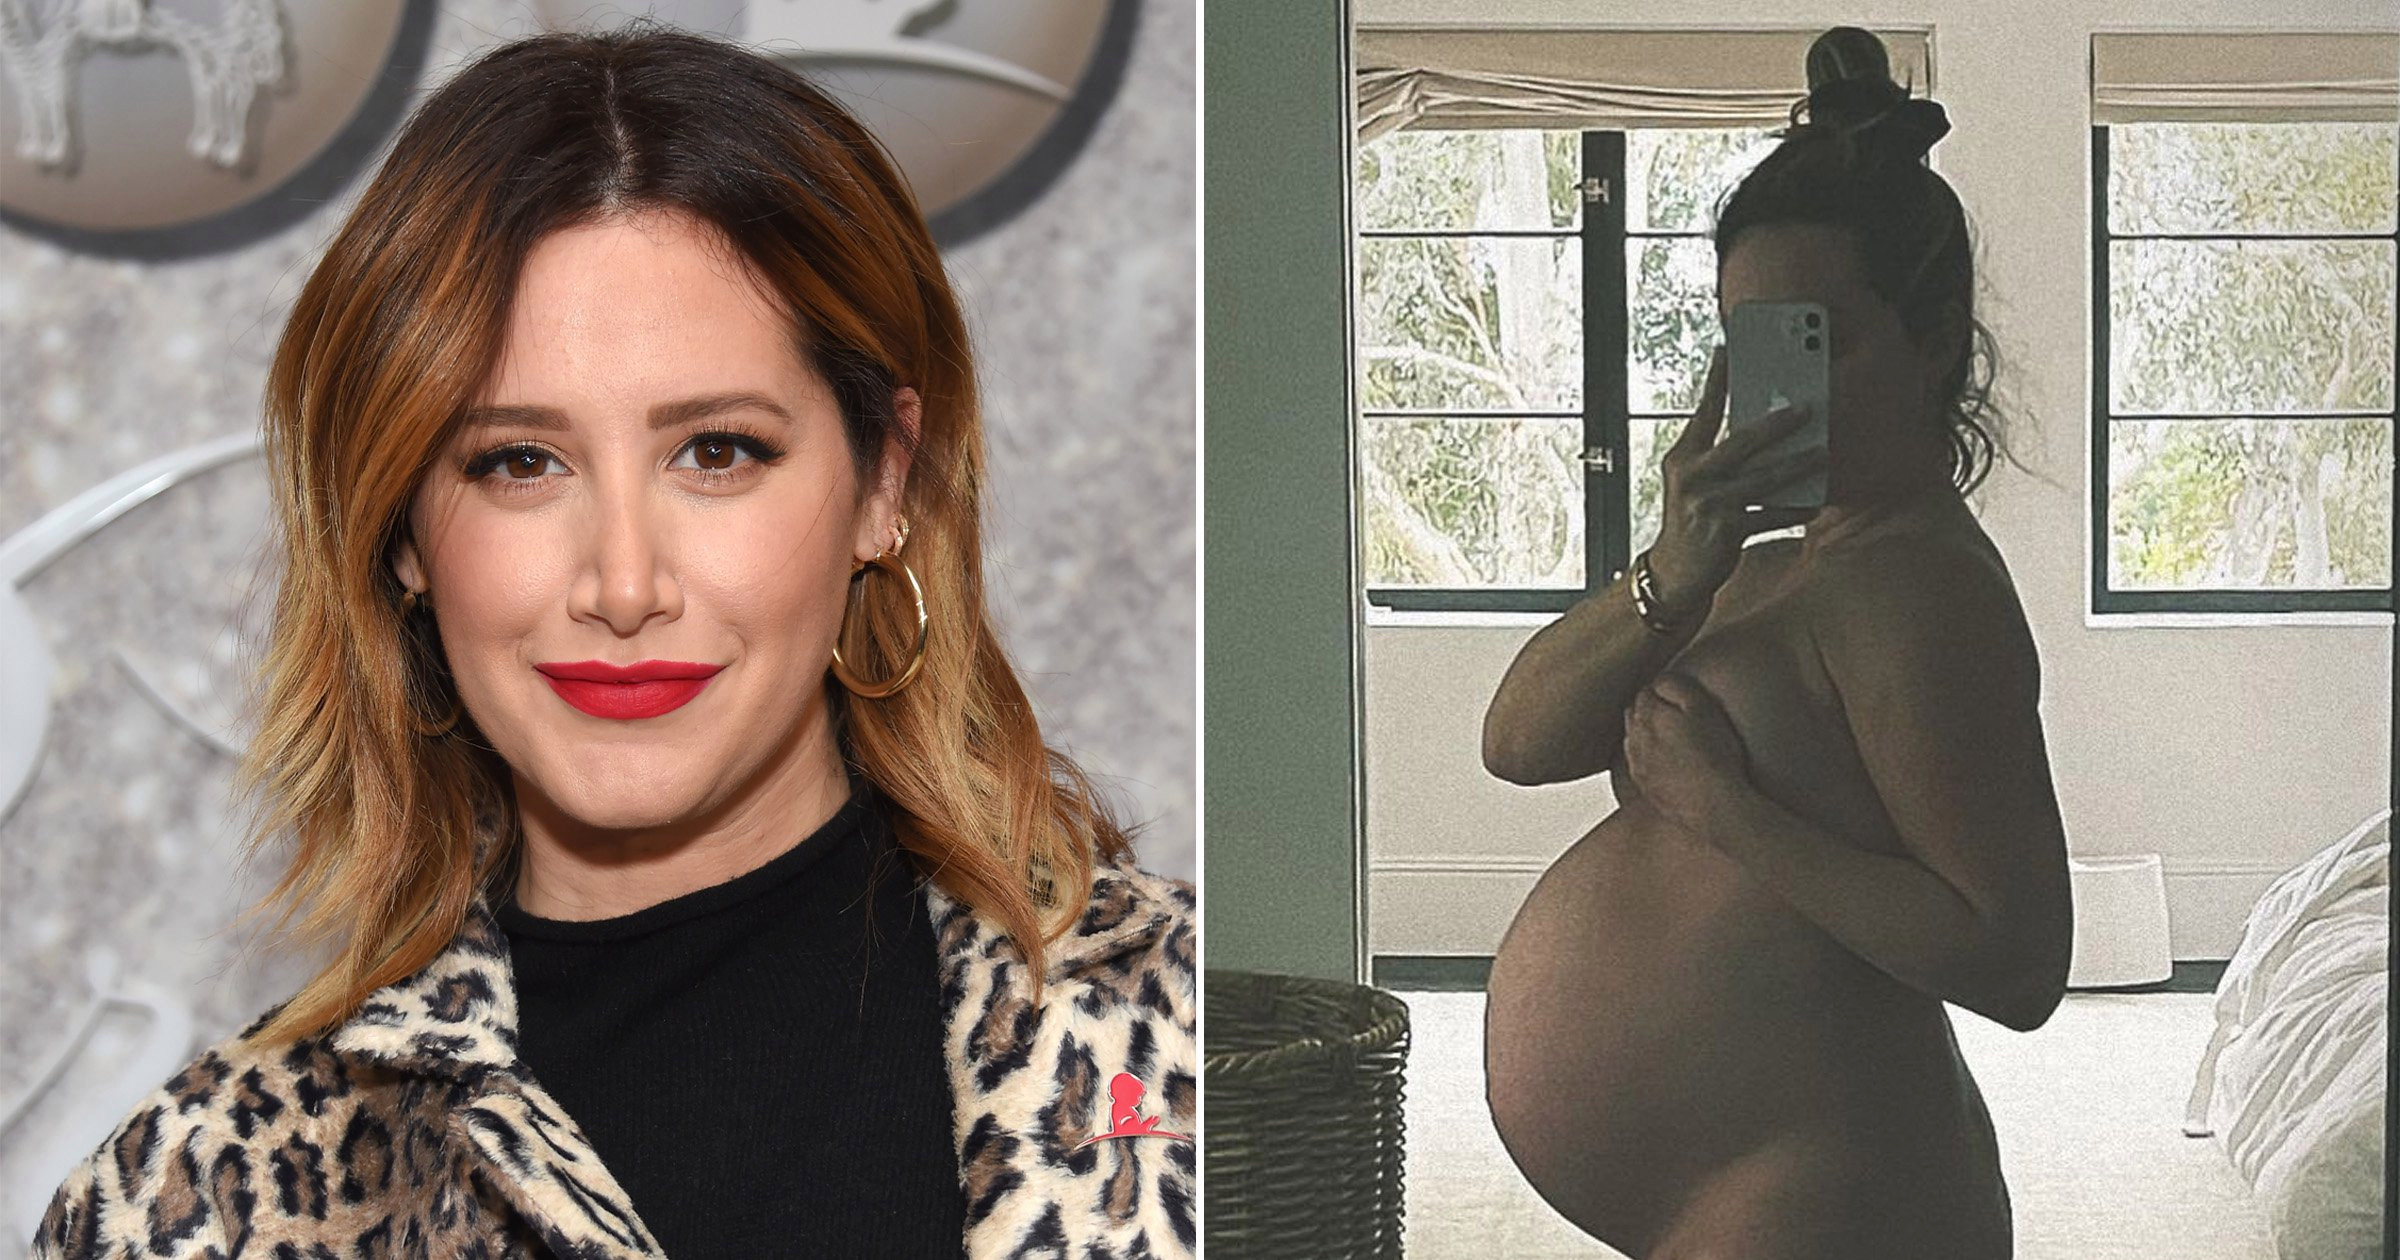 Ashley Tisdale shows off her baby bump in nude selfie: ‘Let’s start loving our bodies in every shape and form’